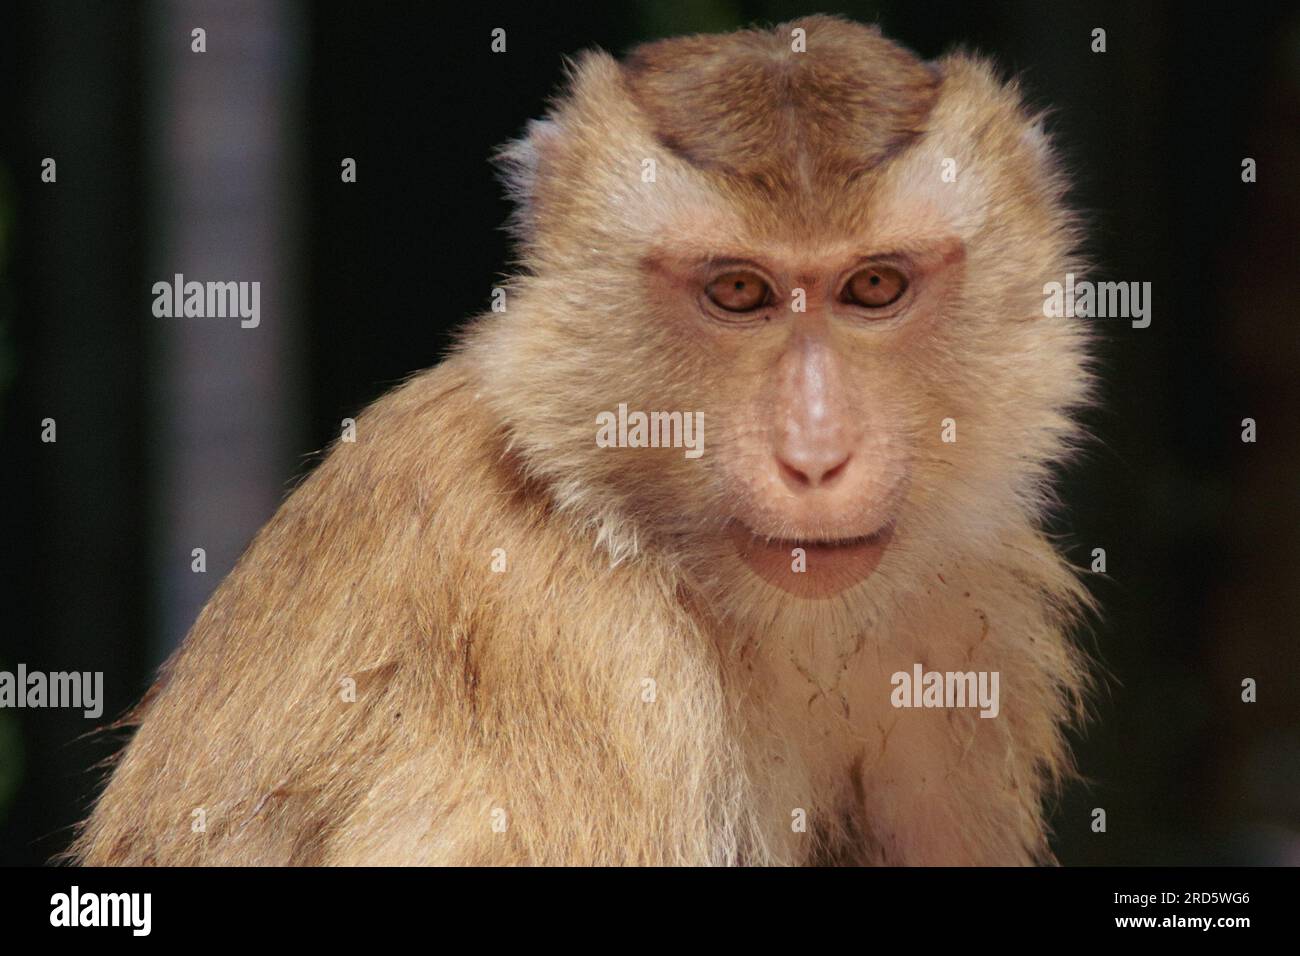 Close up of an asian monkey looking at the camera Stock Photo